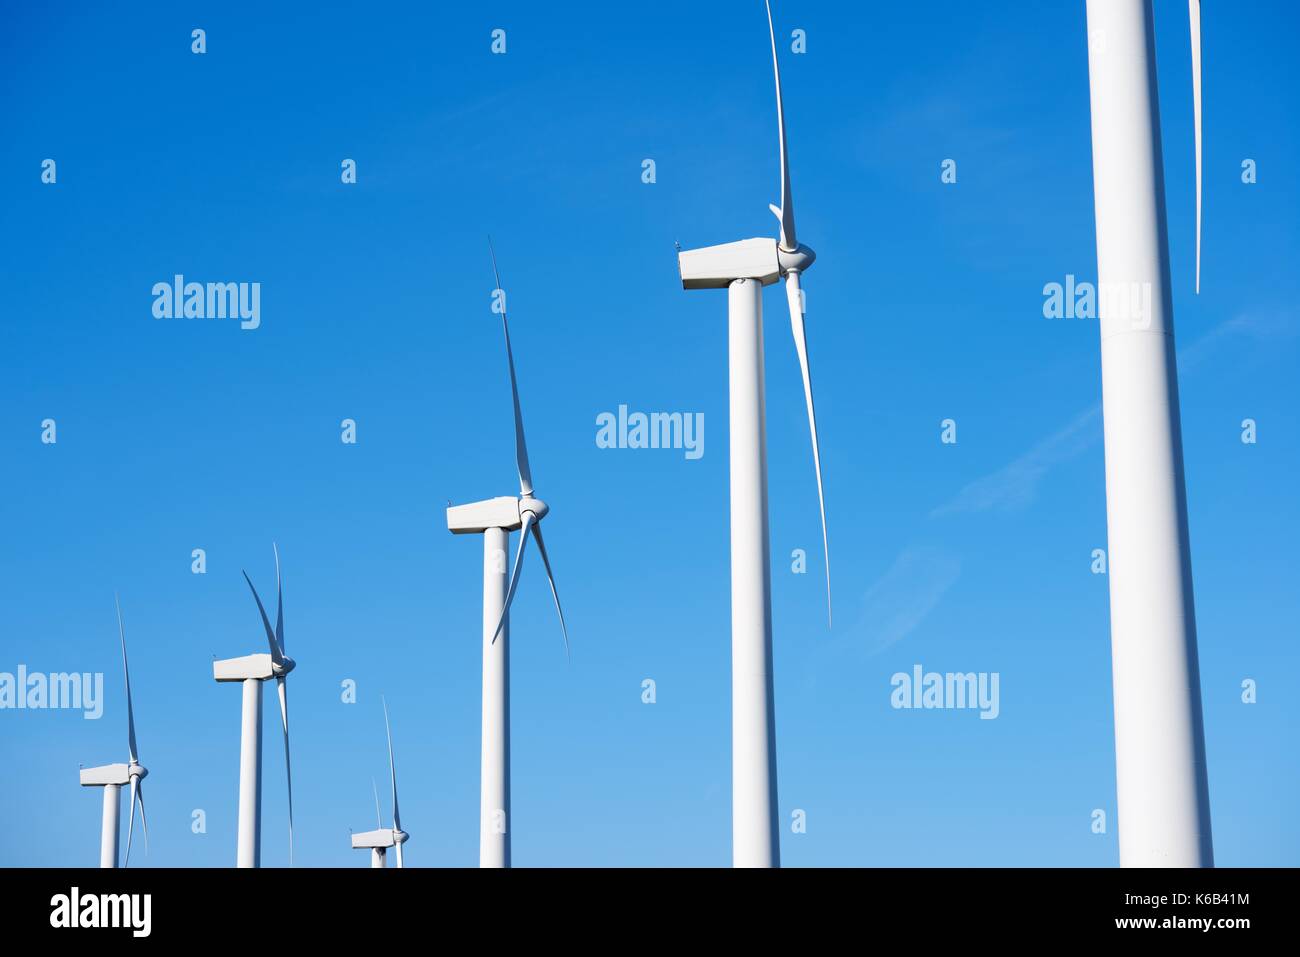 windmills for  electric power production and blue sky, El Buste, Zaragoza, Aragon, Spain Stock Photo